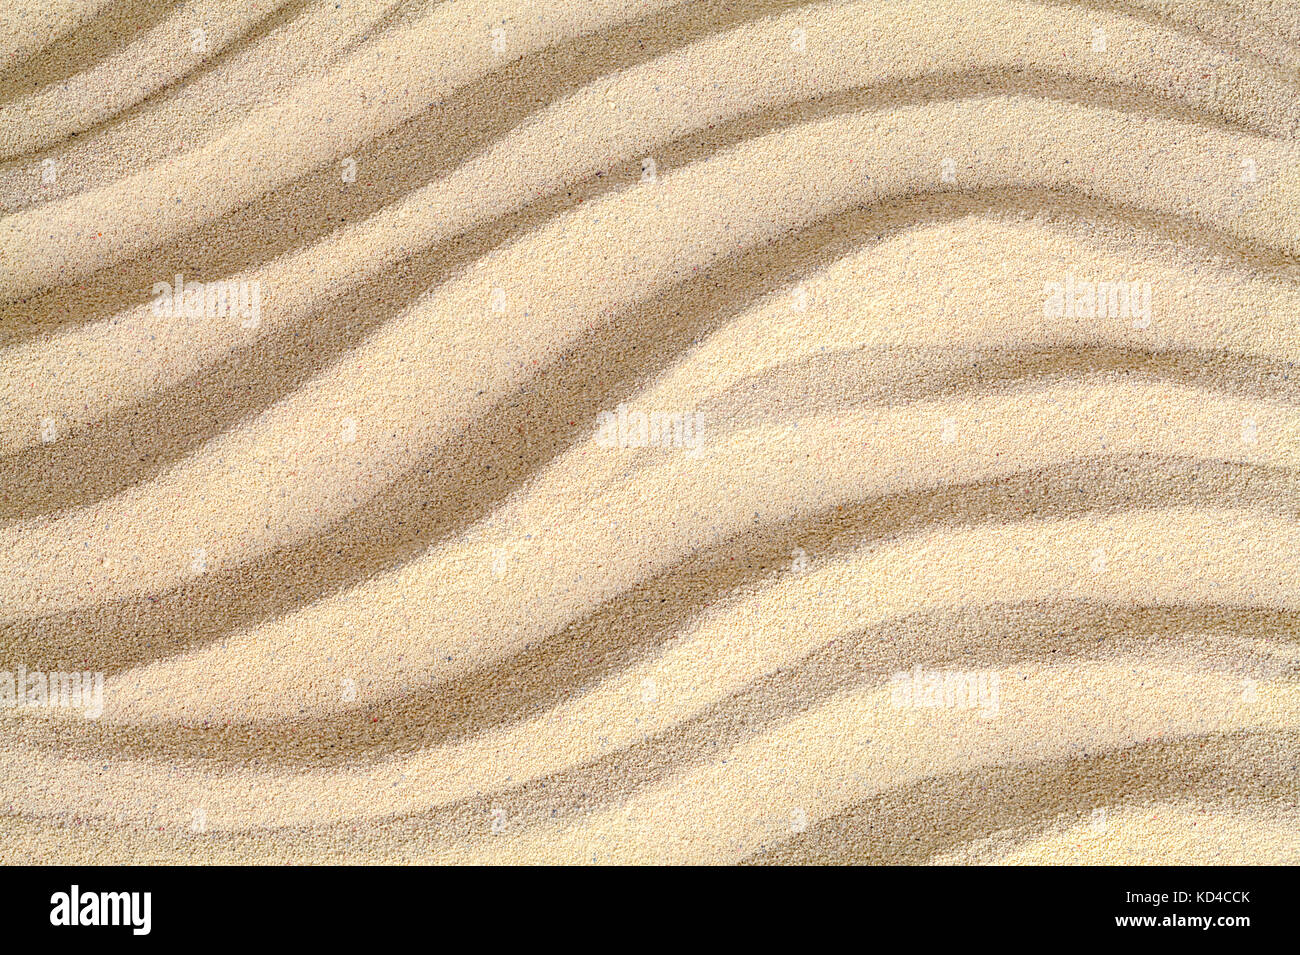 Close Up of Brown Beach Sand with Wave Pattern. Stock Photo